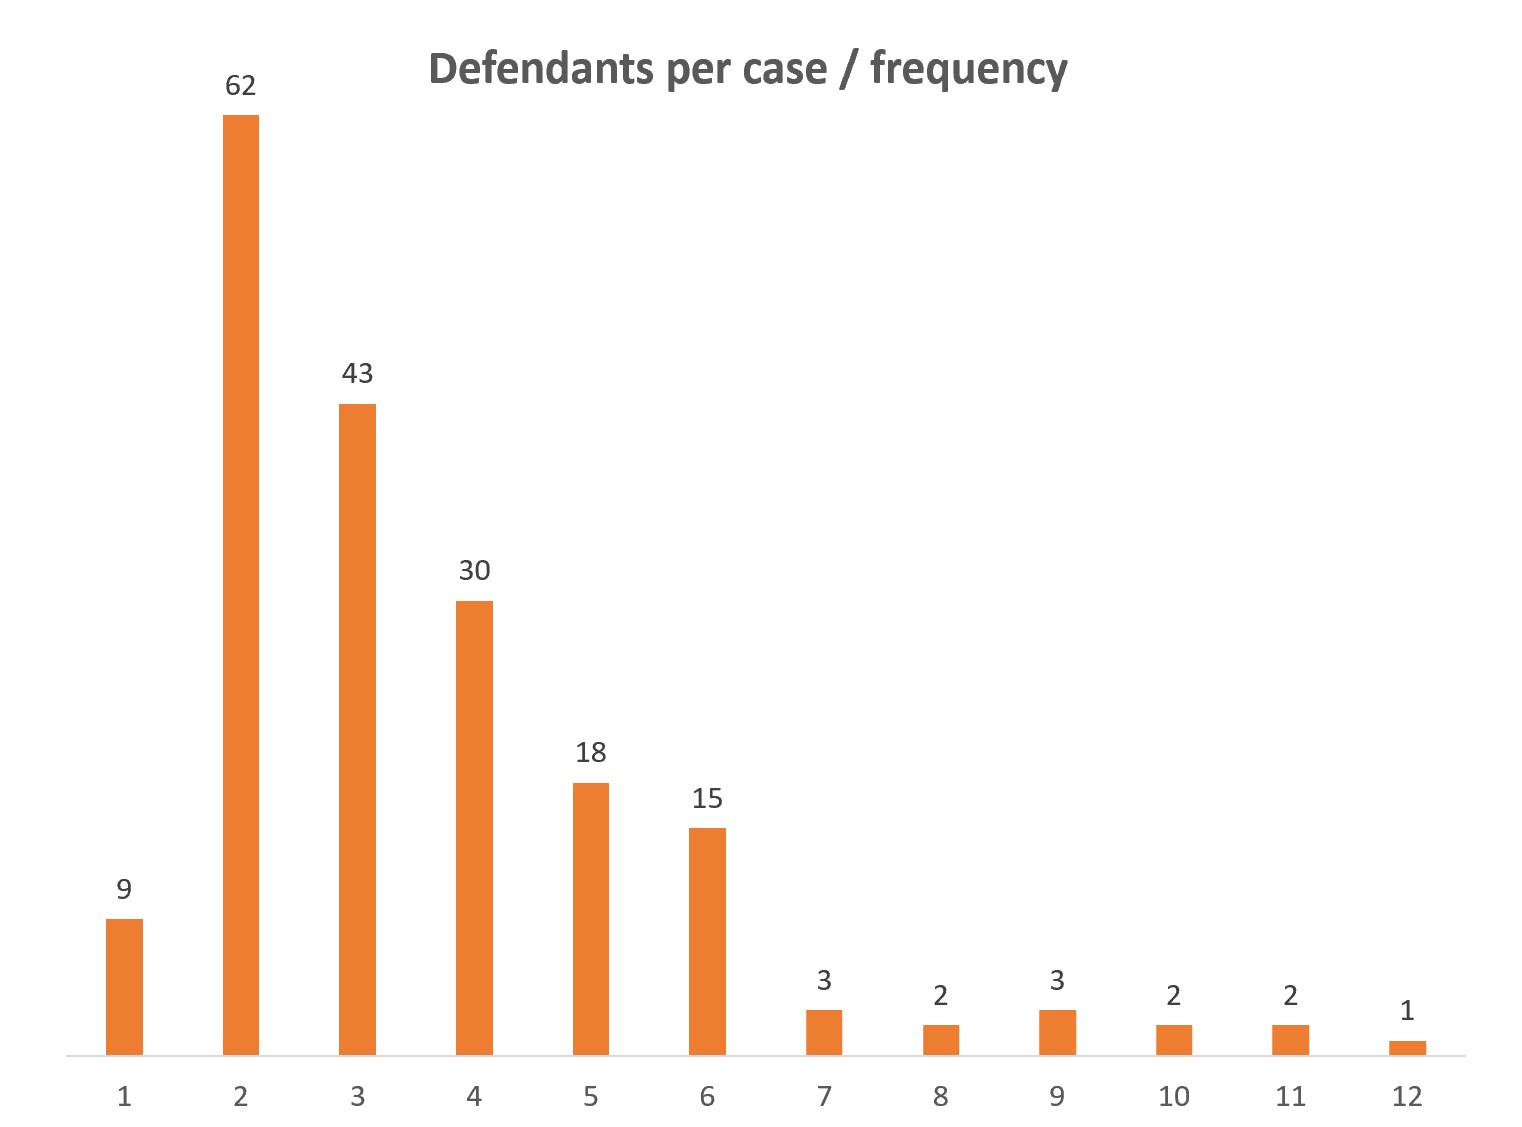 Graph showing the number of cases featuring the number of defendants from 1 to 12. These are as follows: 1 defendant: 9 cases; 2 defendants: 62 defendants; 3 defendants: 43 cases; 4 defendants: 30 cases; 5 defendants: 18 cases; 6 defendants, 15 cases; 7 defendants: 3 cases; 8 defendants: 2 cases; 9 defendants: 3 cases; 10 defendants: 3 cases; 10 defendants: 2 cases; 11 defendants: 2 cases; 12 defendants: 1 case.